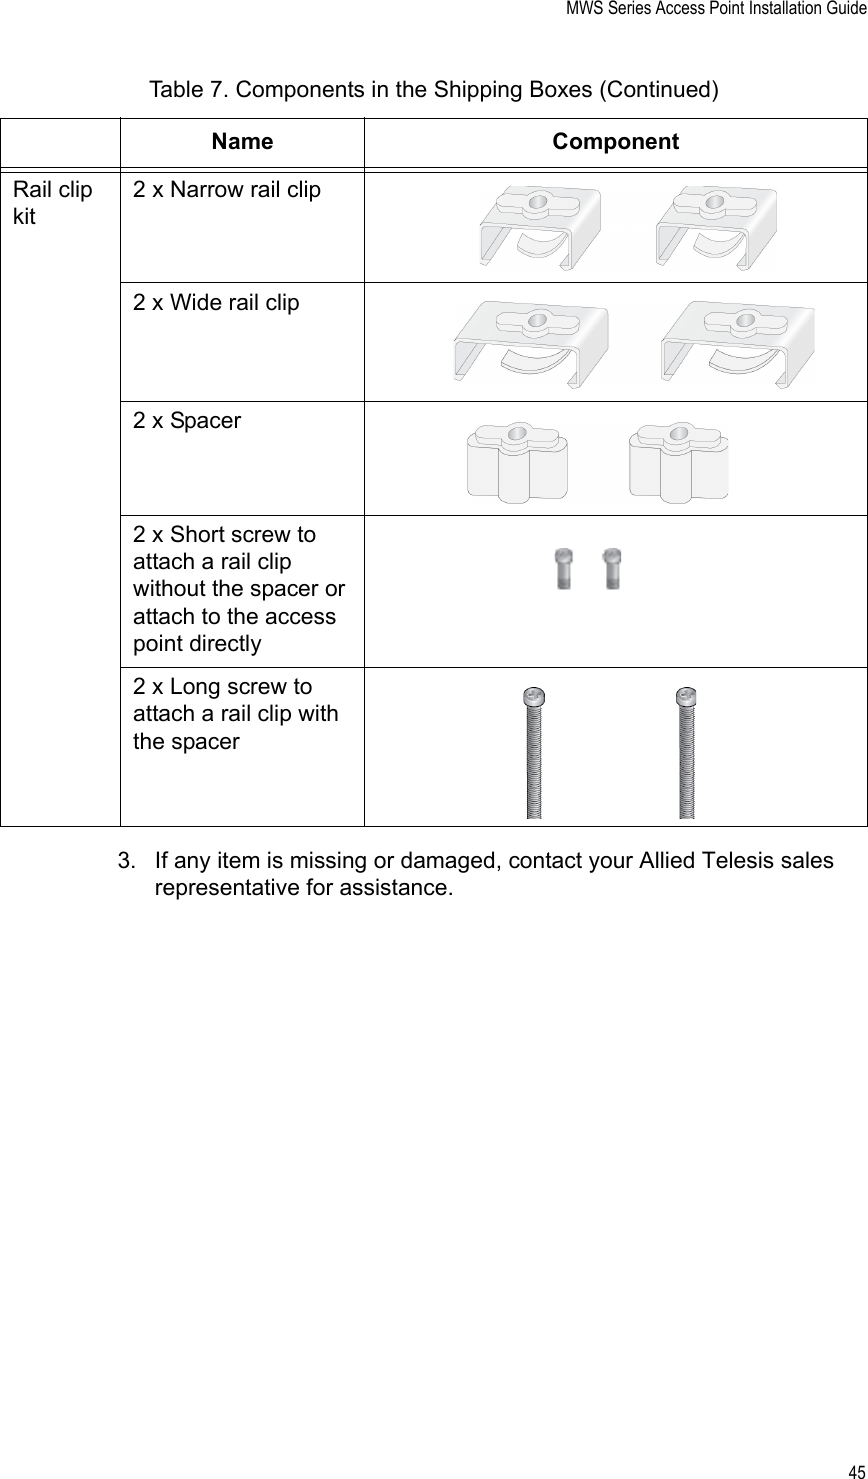 MWS Series Access Point Installation Guide453. If any item is missing or damaged, contact your Allied Telesis sales representative for assistance.Rail clip kit2 x Narrow rail clip2 x Wide rail clip2 x Spacer2 x Short screw to attach a rail clip without the spacer or attach to the access point directly2 x Long screw to attach a rail clip with the spacerTable 7. Components in the Shipping Boxes (Continued)Name Component